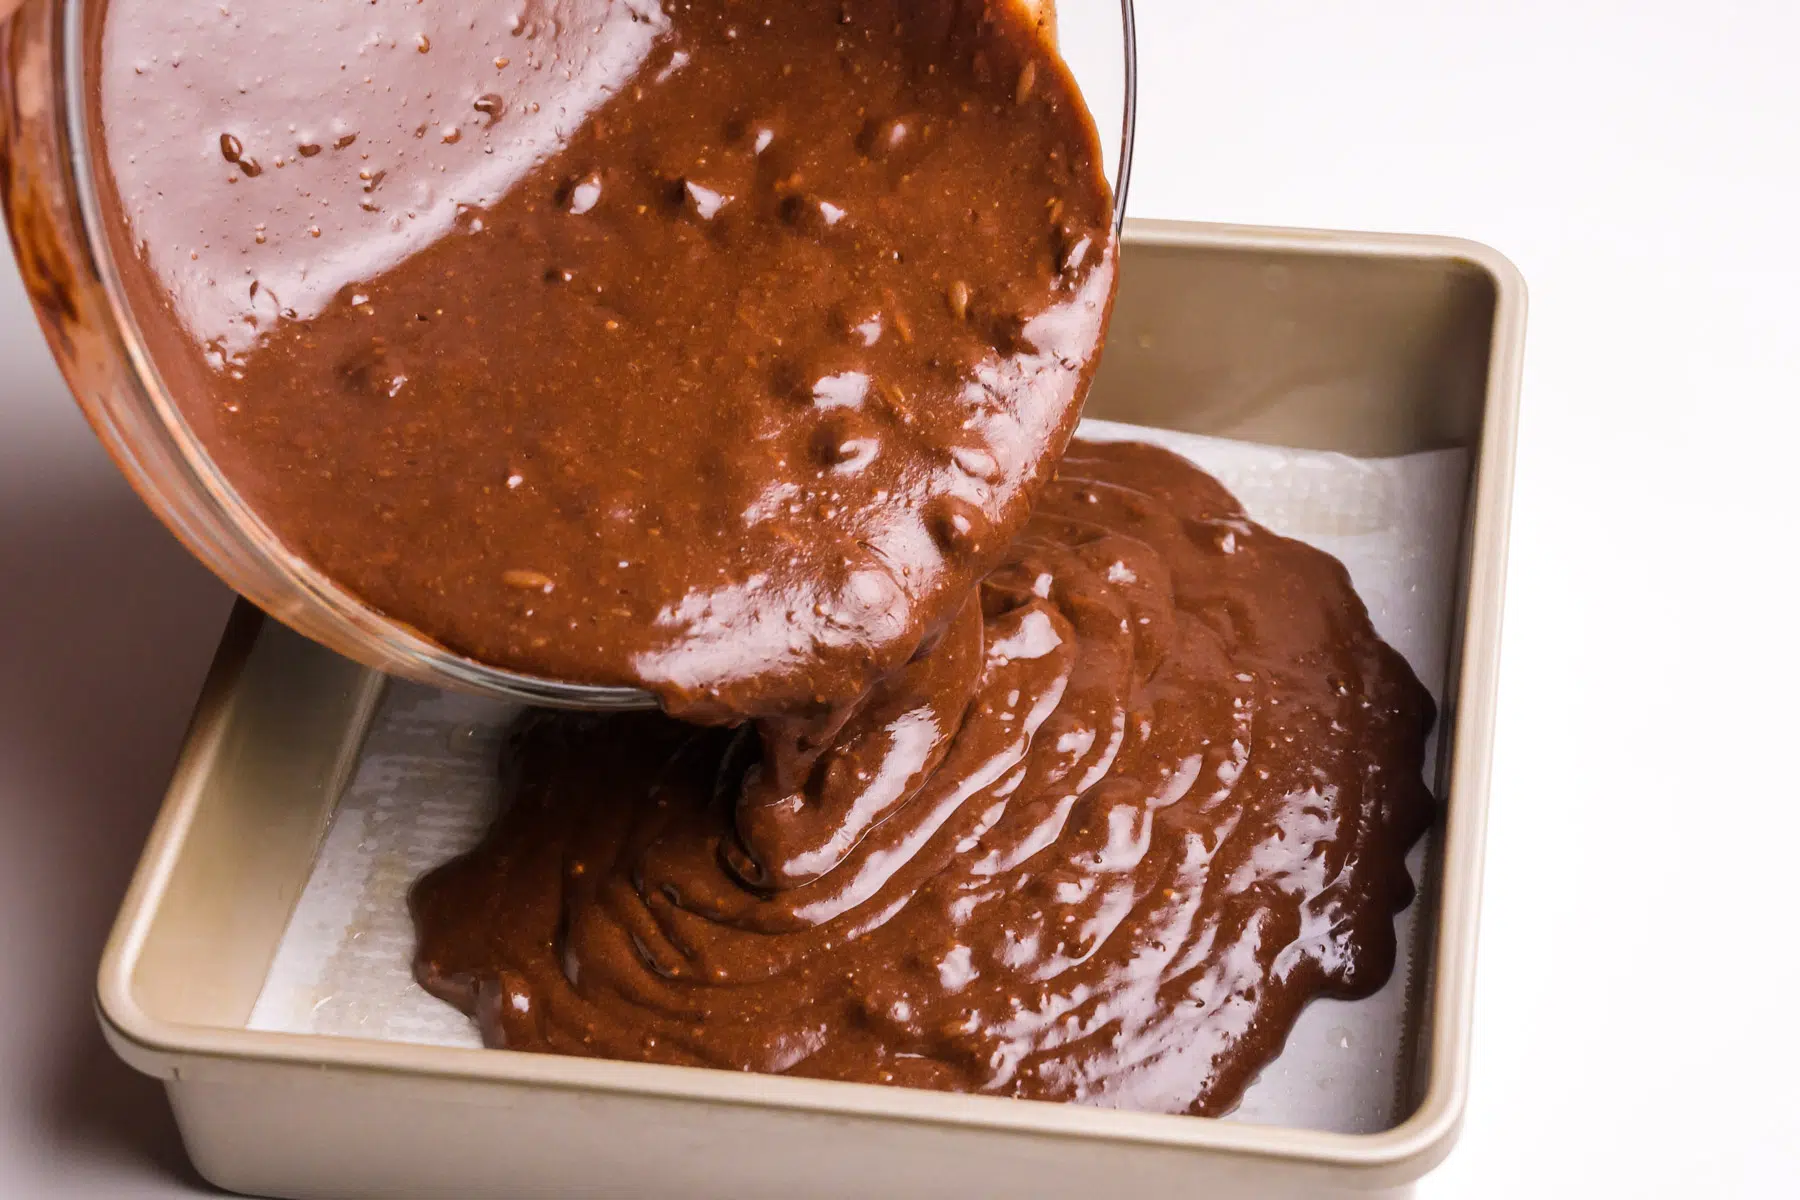 Brownie batter is being poured into a baking dish.